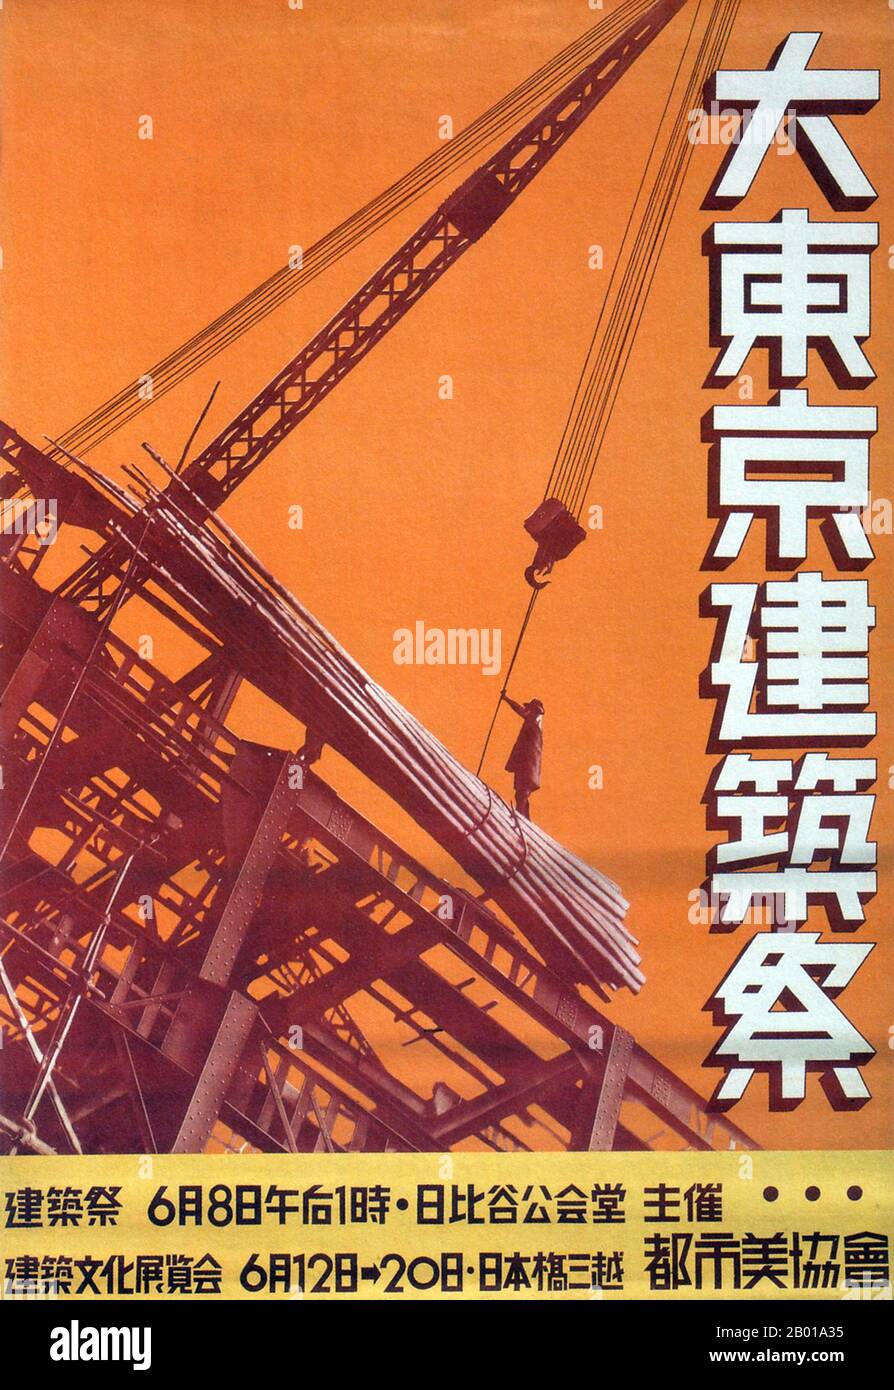 Japan: Advertising poster for the Tokyo Construction Fair, 1935.  Between the end of the First World War in 1918 and the outbreak of the Pacific War in 1941, Japanese graphic design as represented in advertsing posters, magazine covers and book covers underwent a series of changes characterised by increasing Western influence, a growing middle class, industrialisation and militarisation, as well as (initially) left wing political ideals and (subsequently) right wing nationalism and the influence of European Fascist art forms. Stock Photo